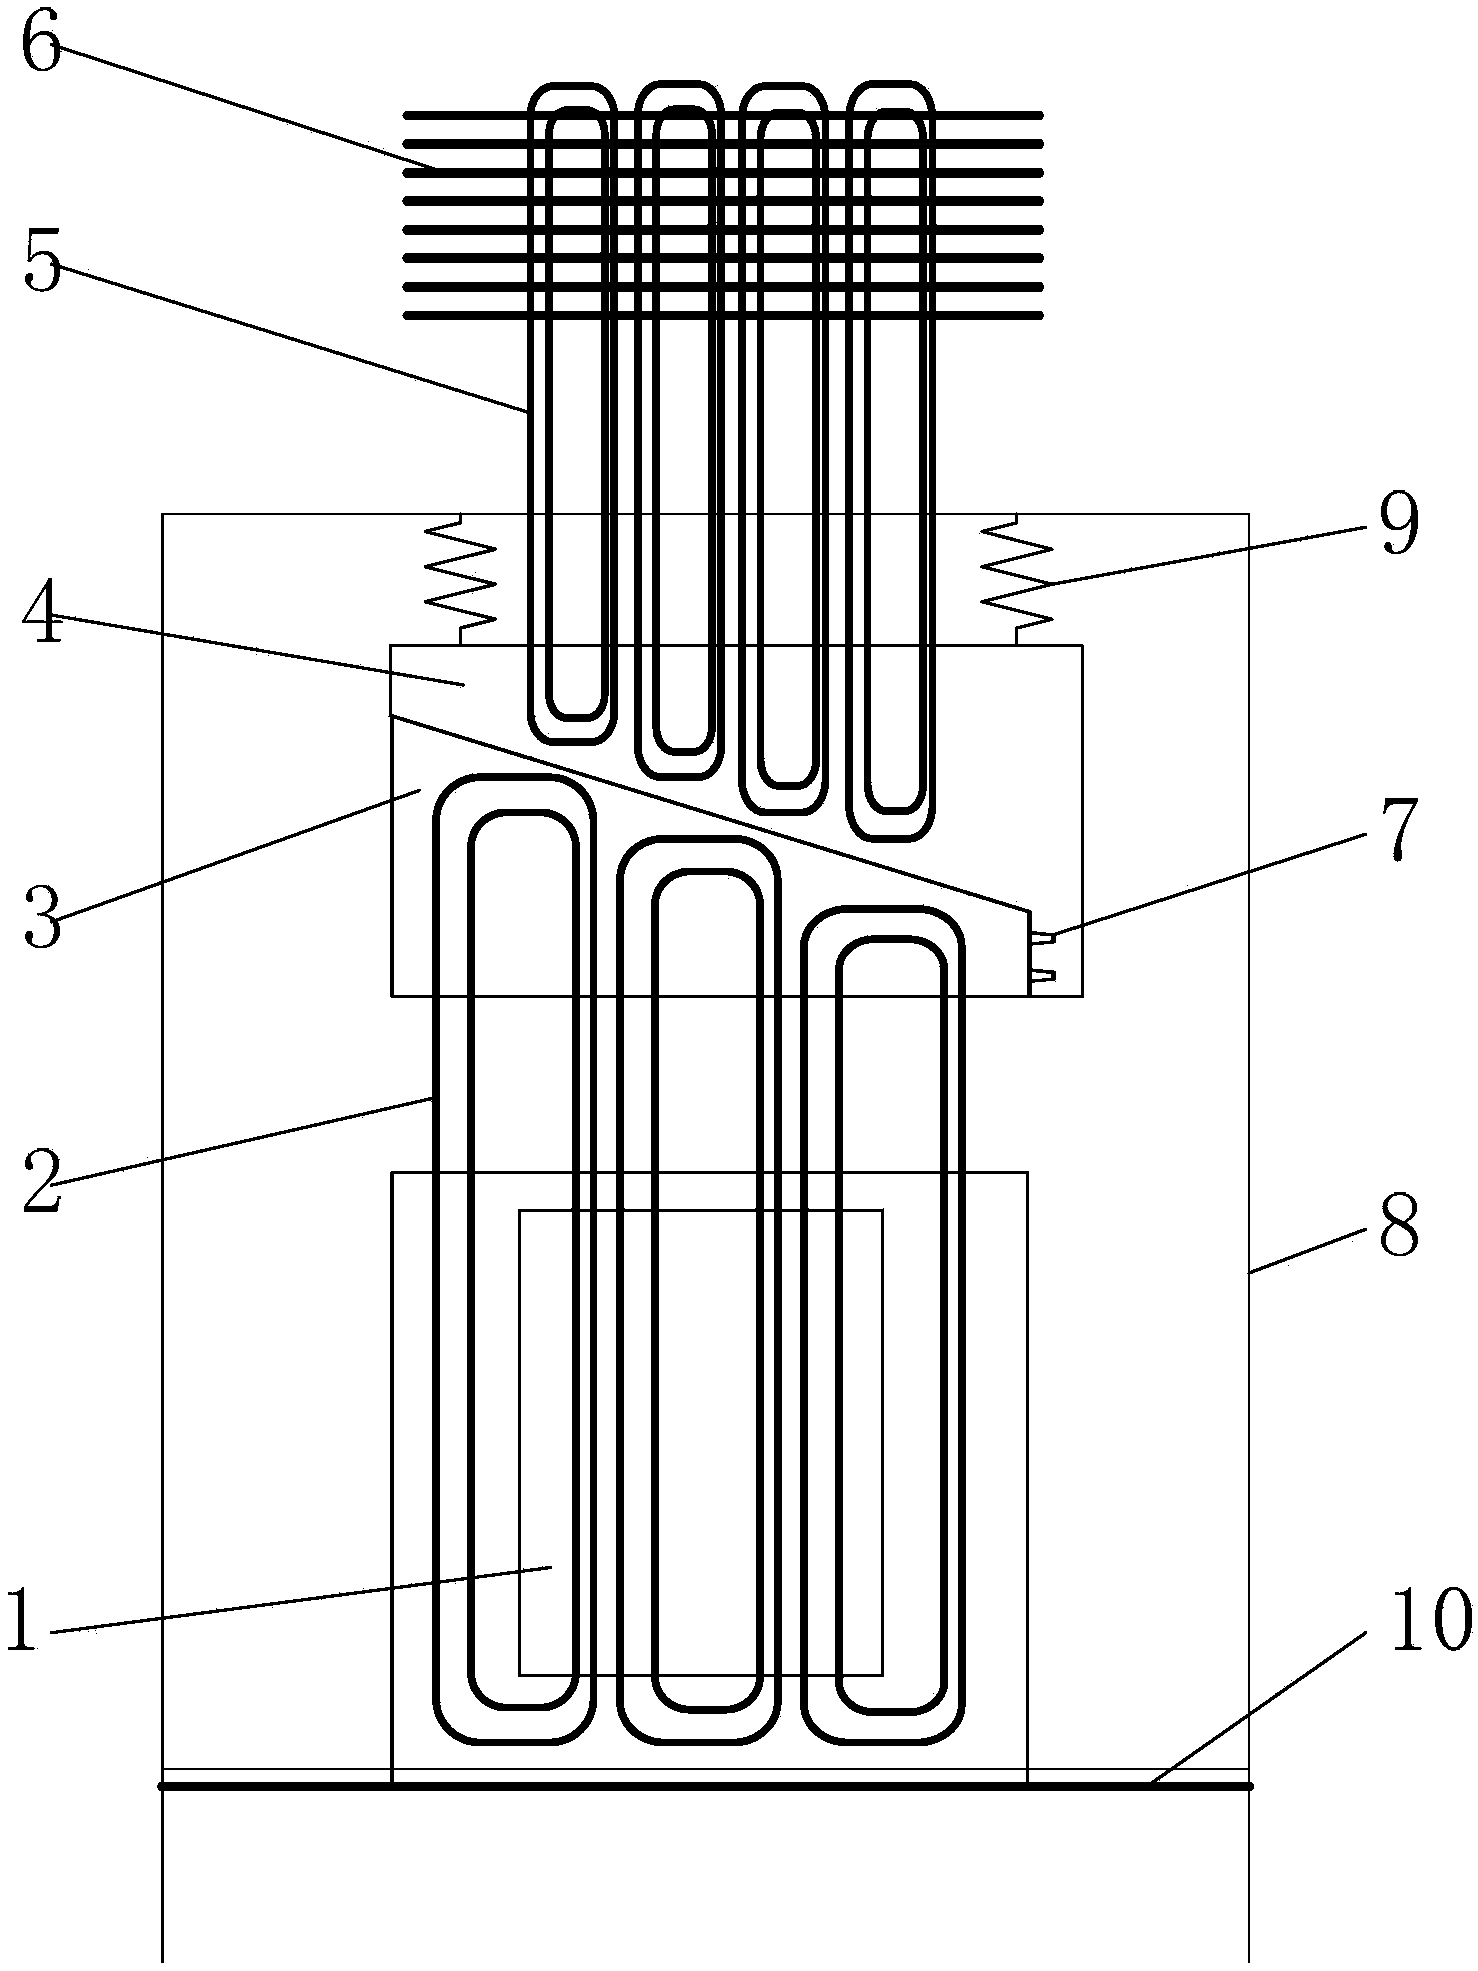 Heat tube cooling system and power equipment